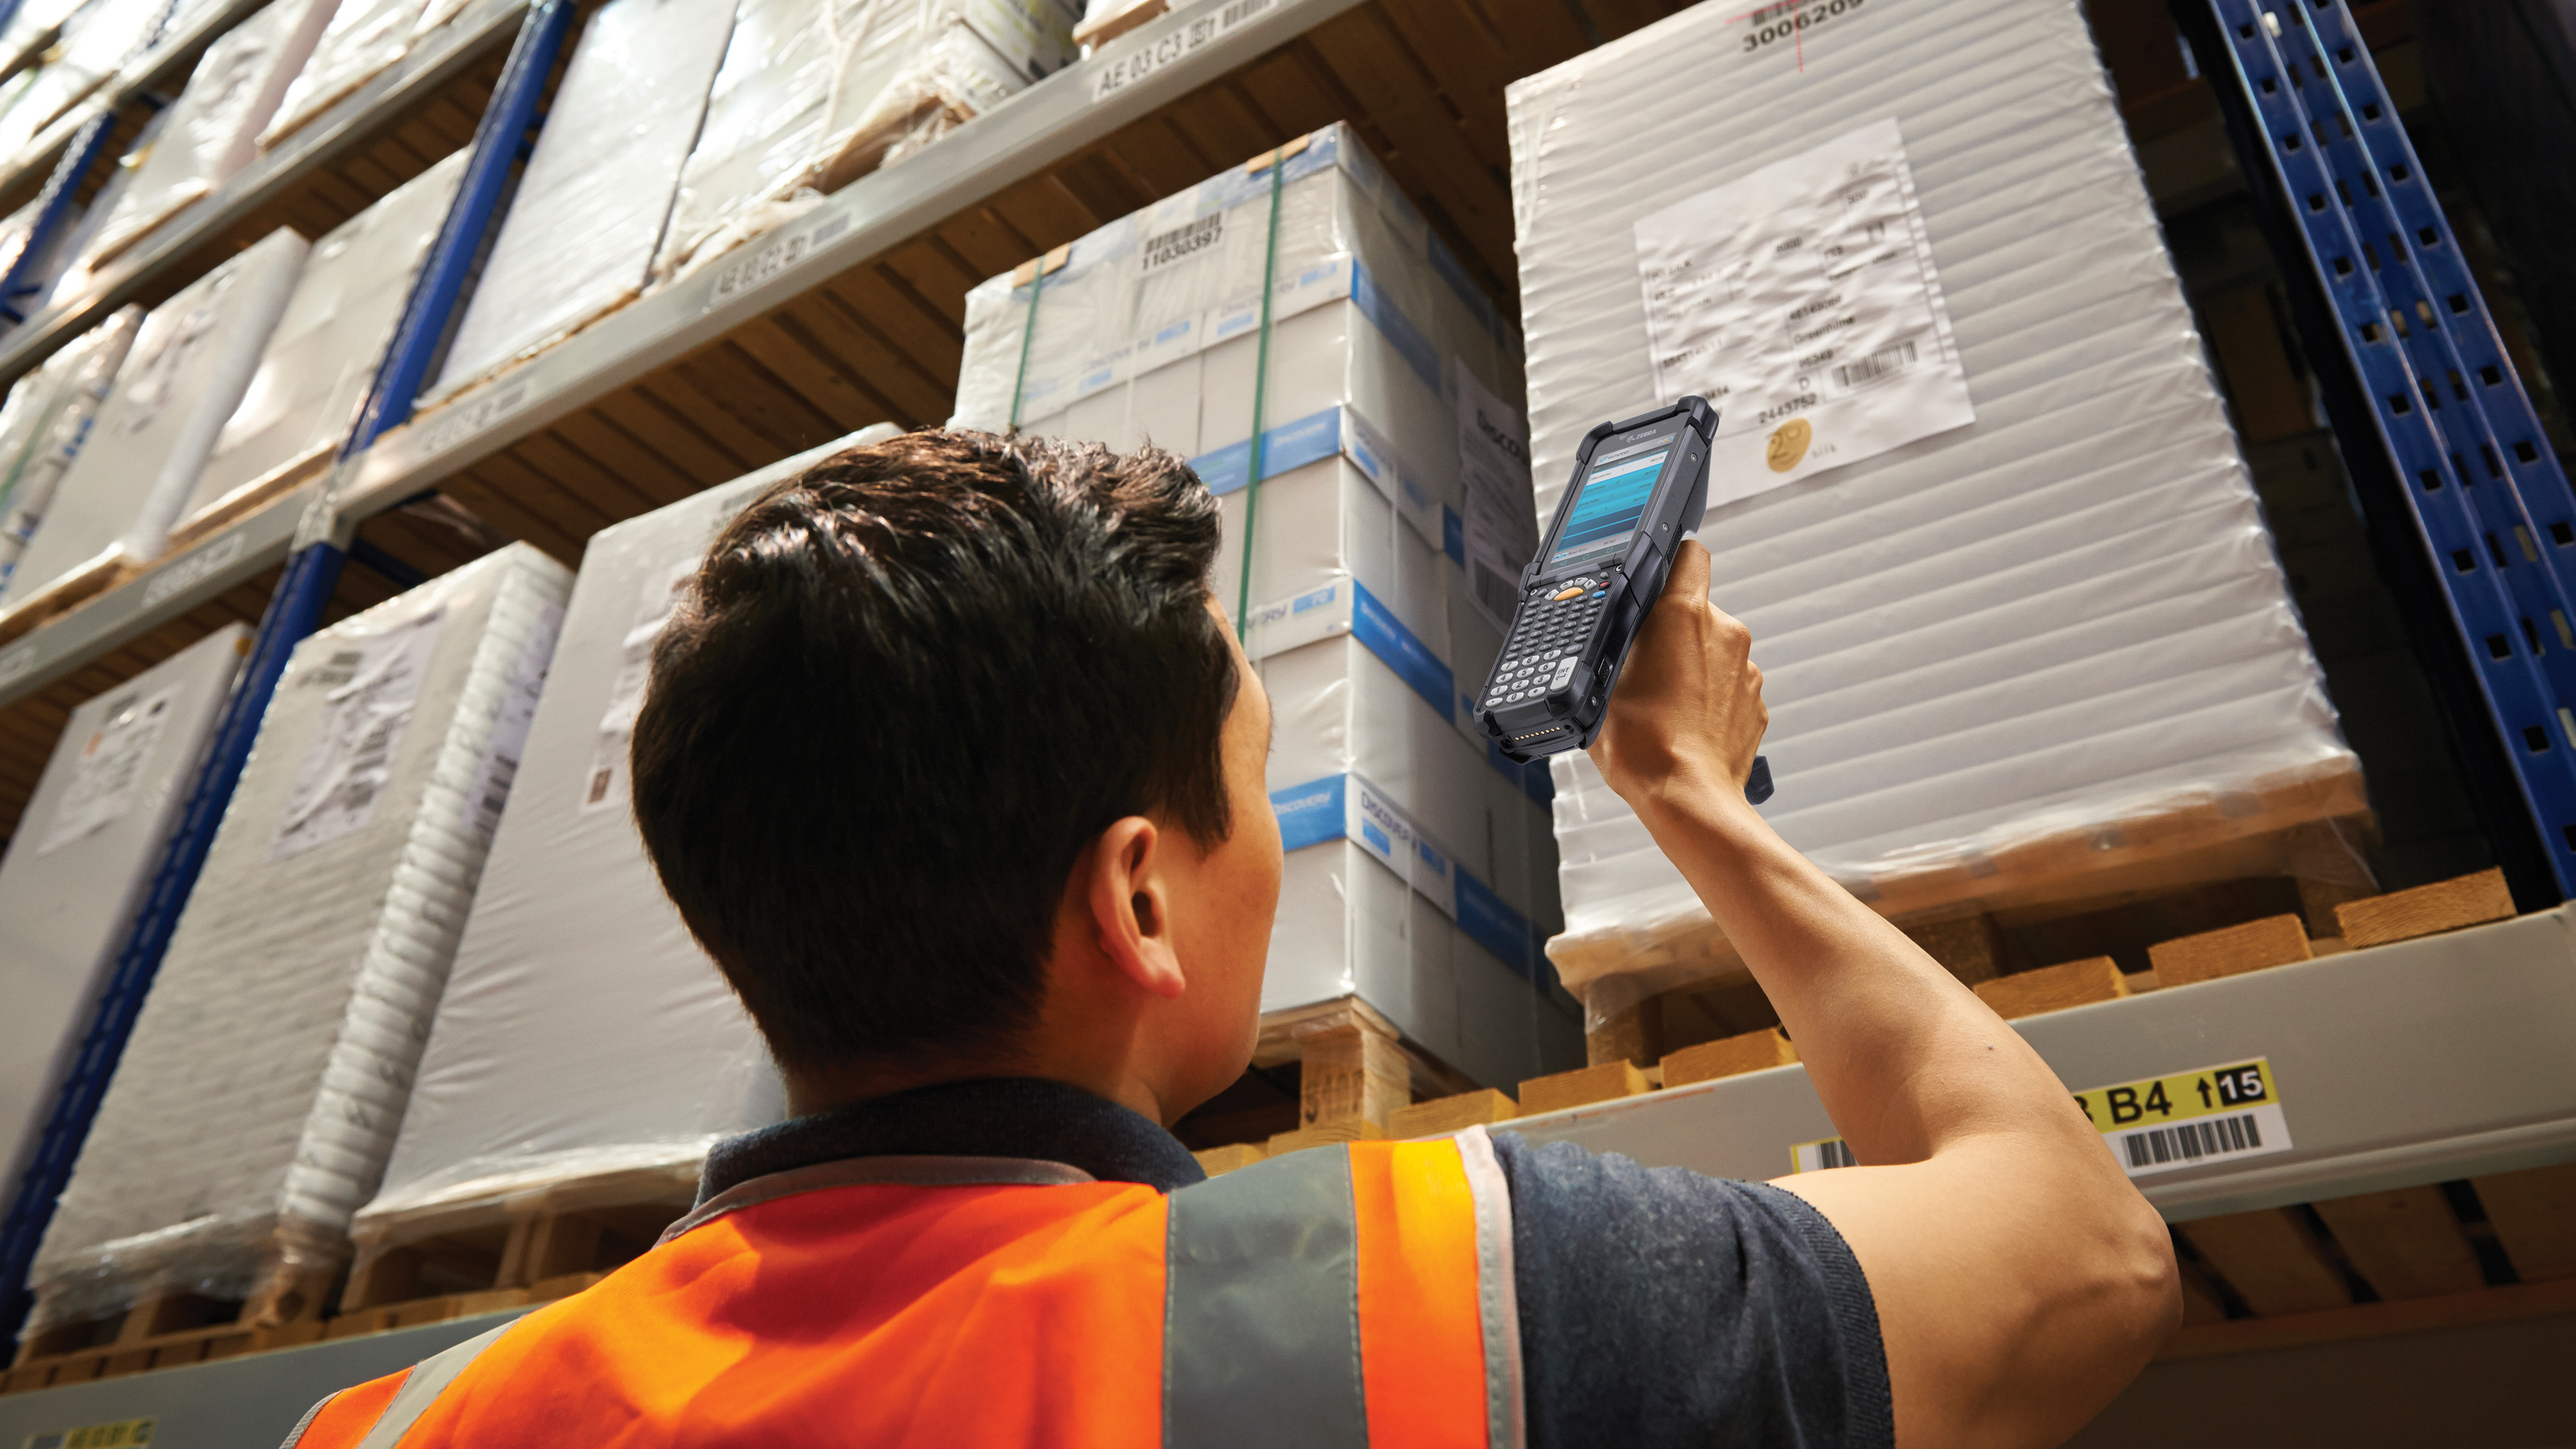 From a far distance, a warehouse employee scans a barcode on a pallet positioned at a great height using a Zebra mobile touch computer.